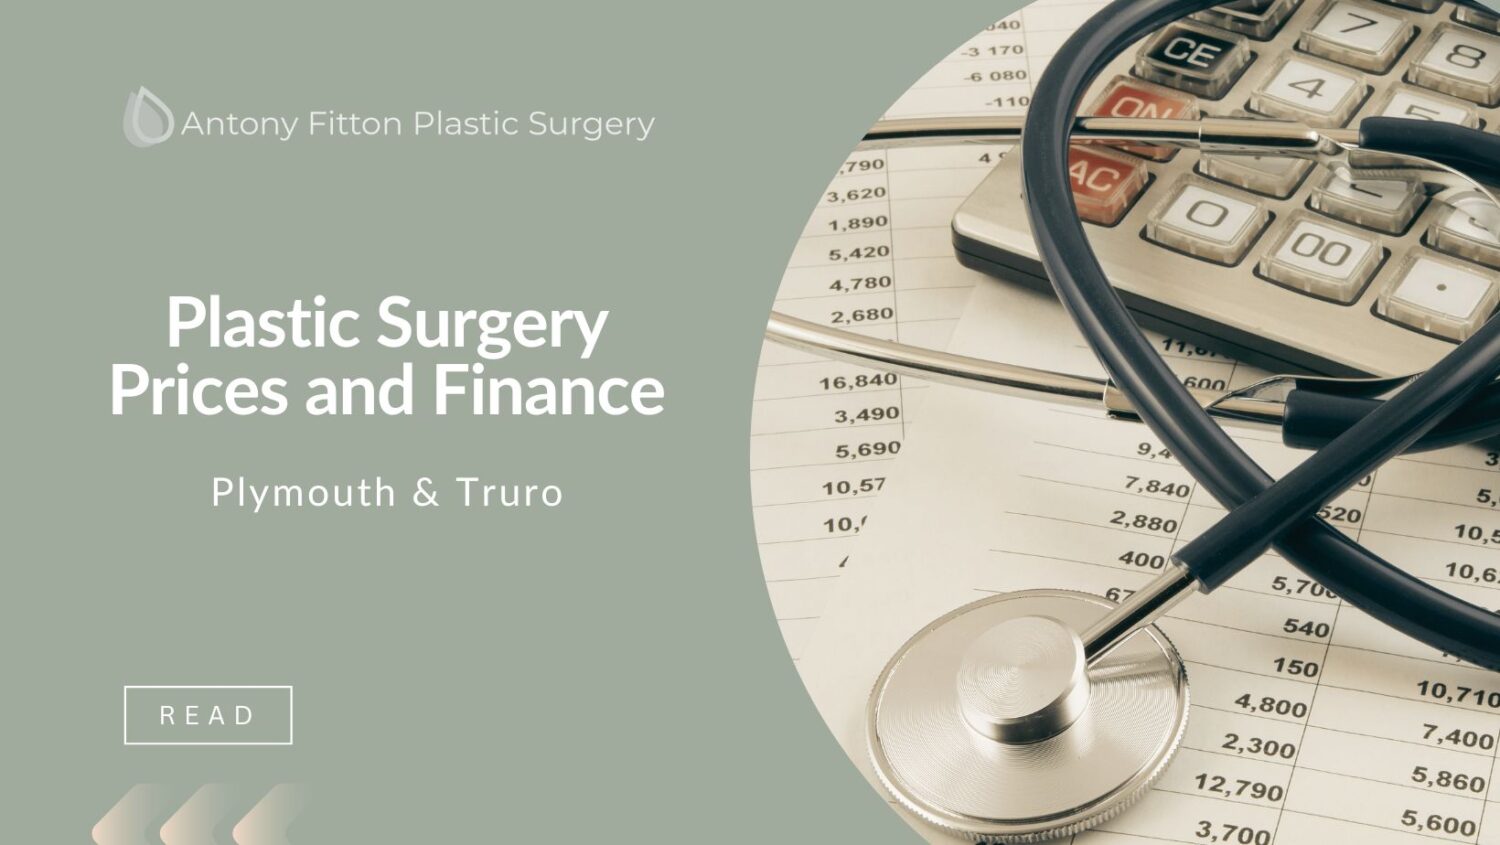 Plastic Surgery Prices and Finance – Mr Antony Fitton